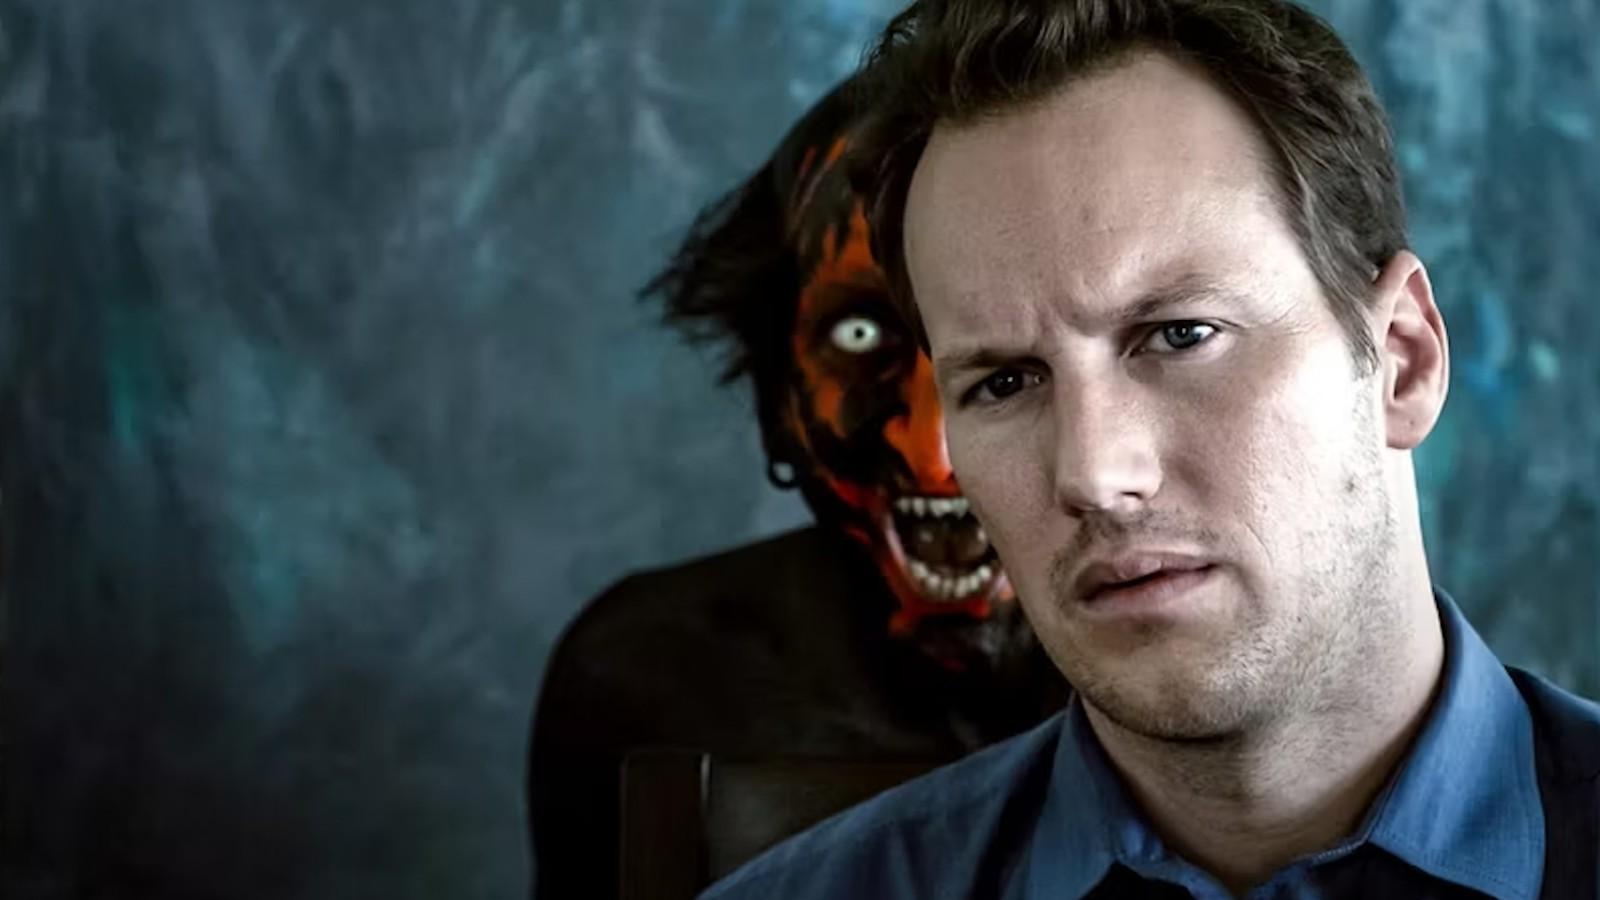 A demon sneaks up on Patrick Wilson in Insidious.